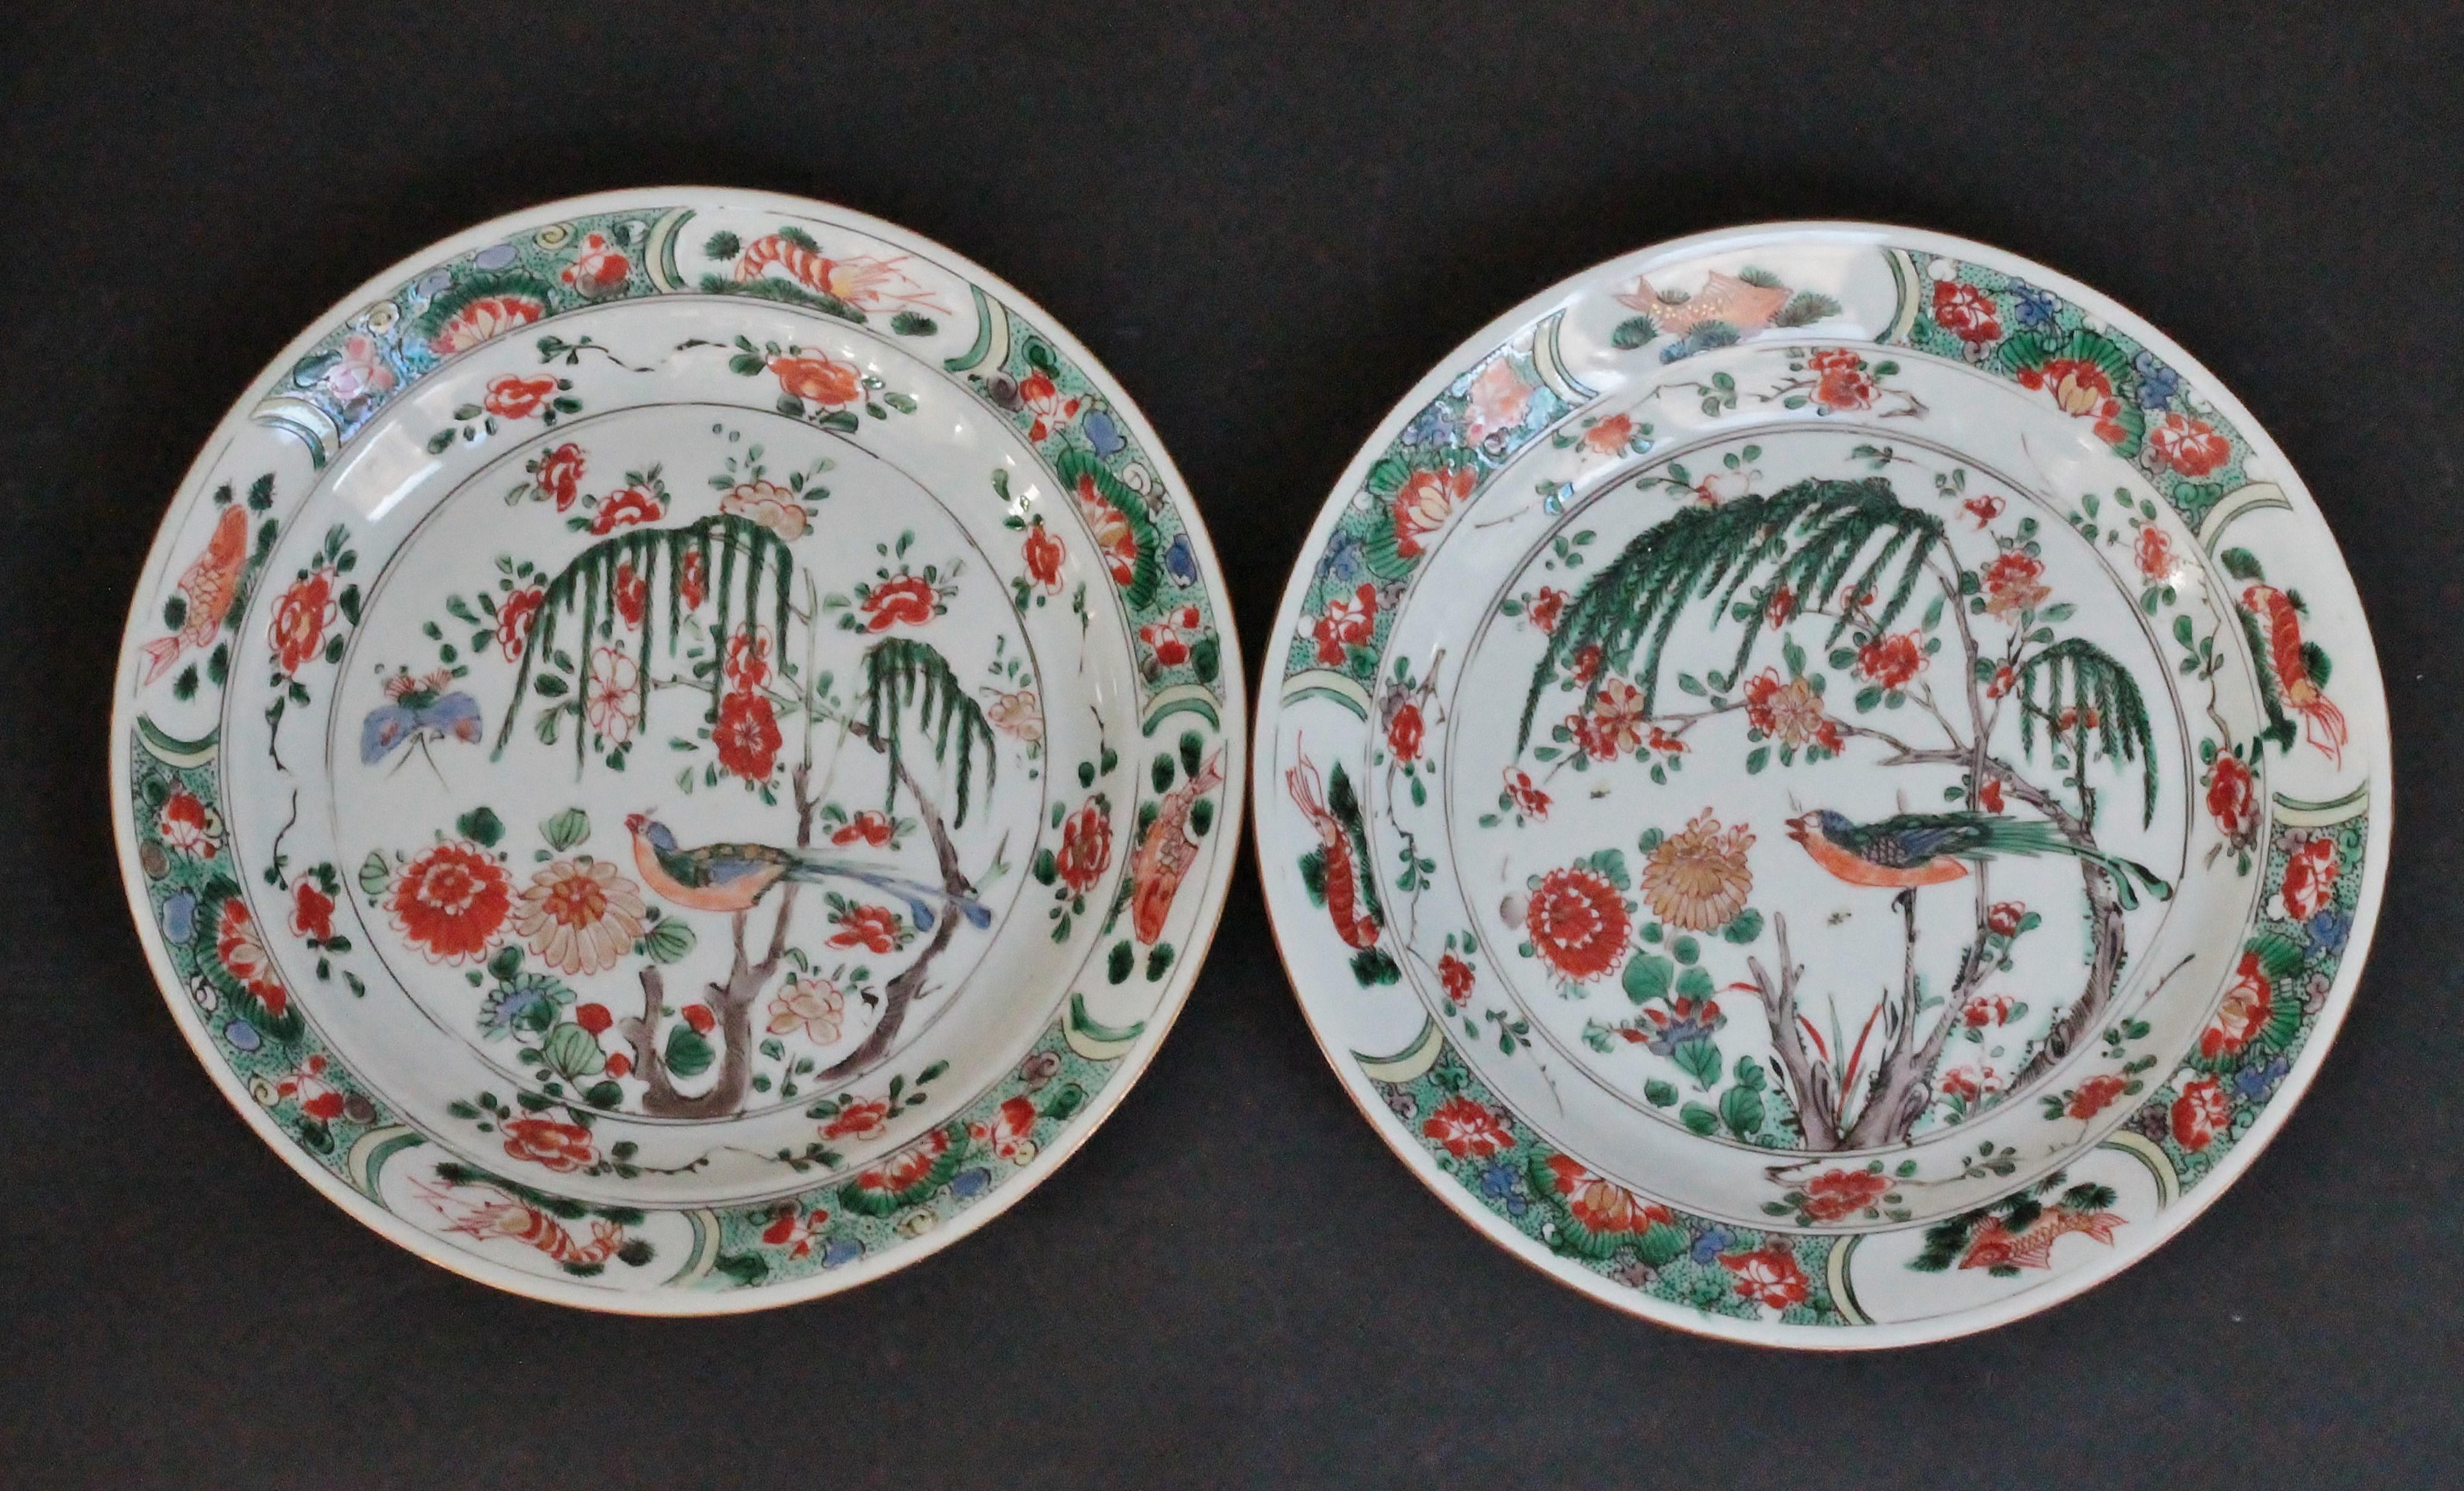 Two plates in China porcelain decorated with Famille Verte enamels of a bird on a tree, fish and prawns in reserves on the border.
Mark of double circle at the back.
Kangxi Period (1662-1722). 18th century.
Measures: Diameter 24 cm, Height 3